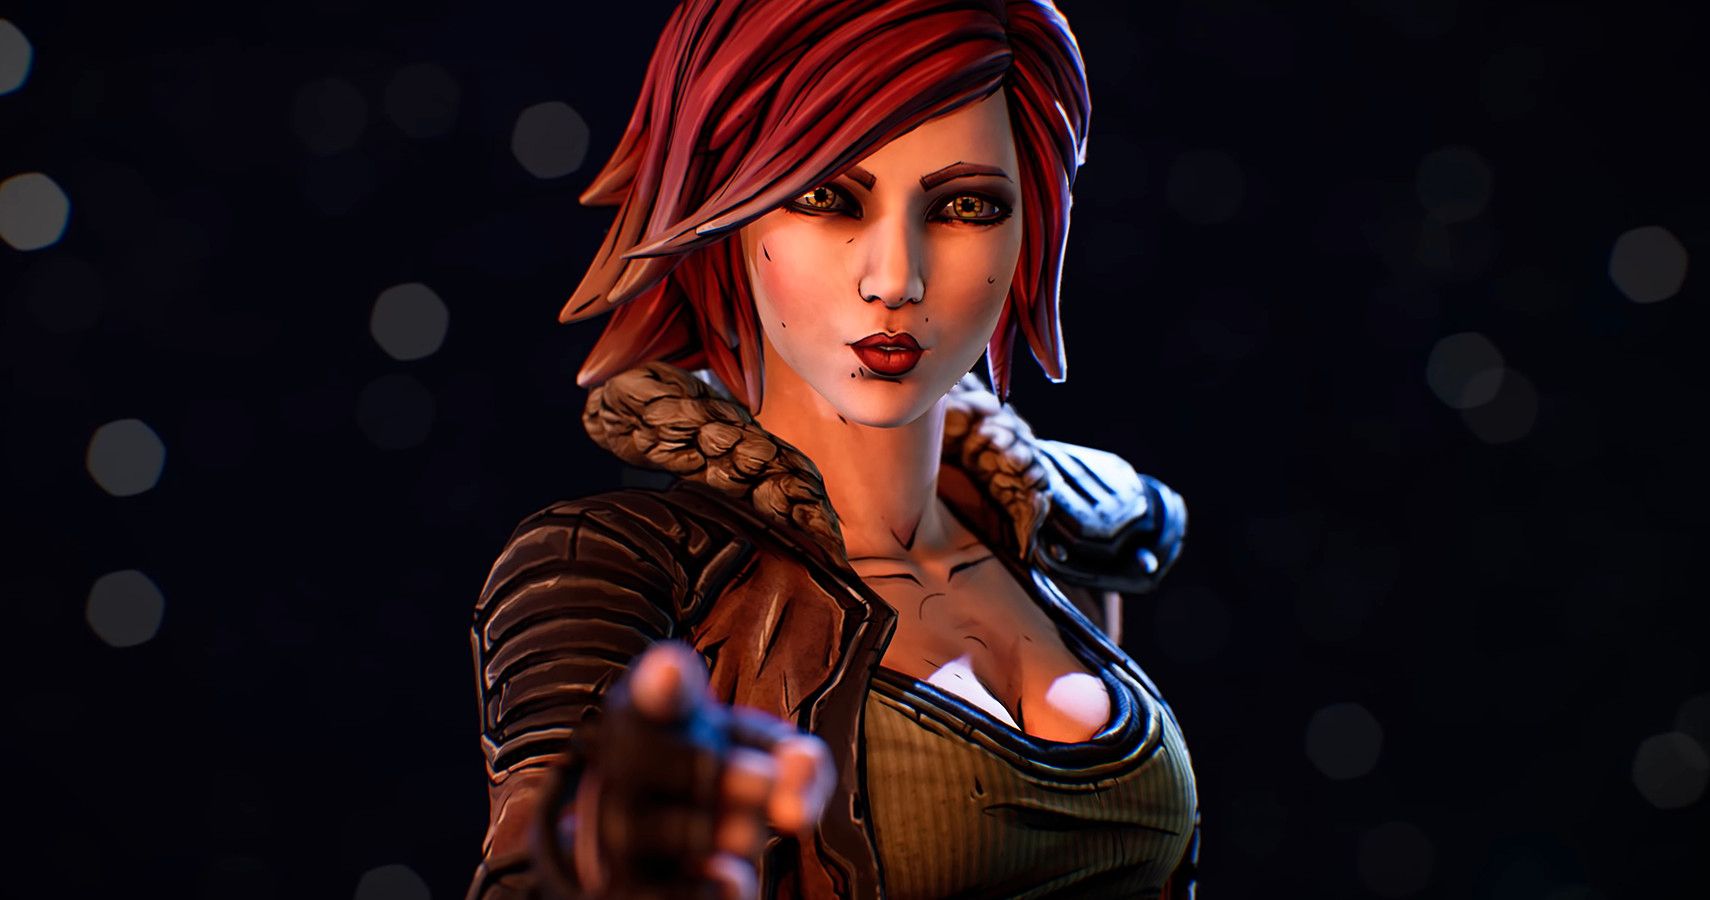 Borderlands Movie Casts Cate Blanchett As Lilith Den Of Geek